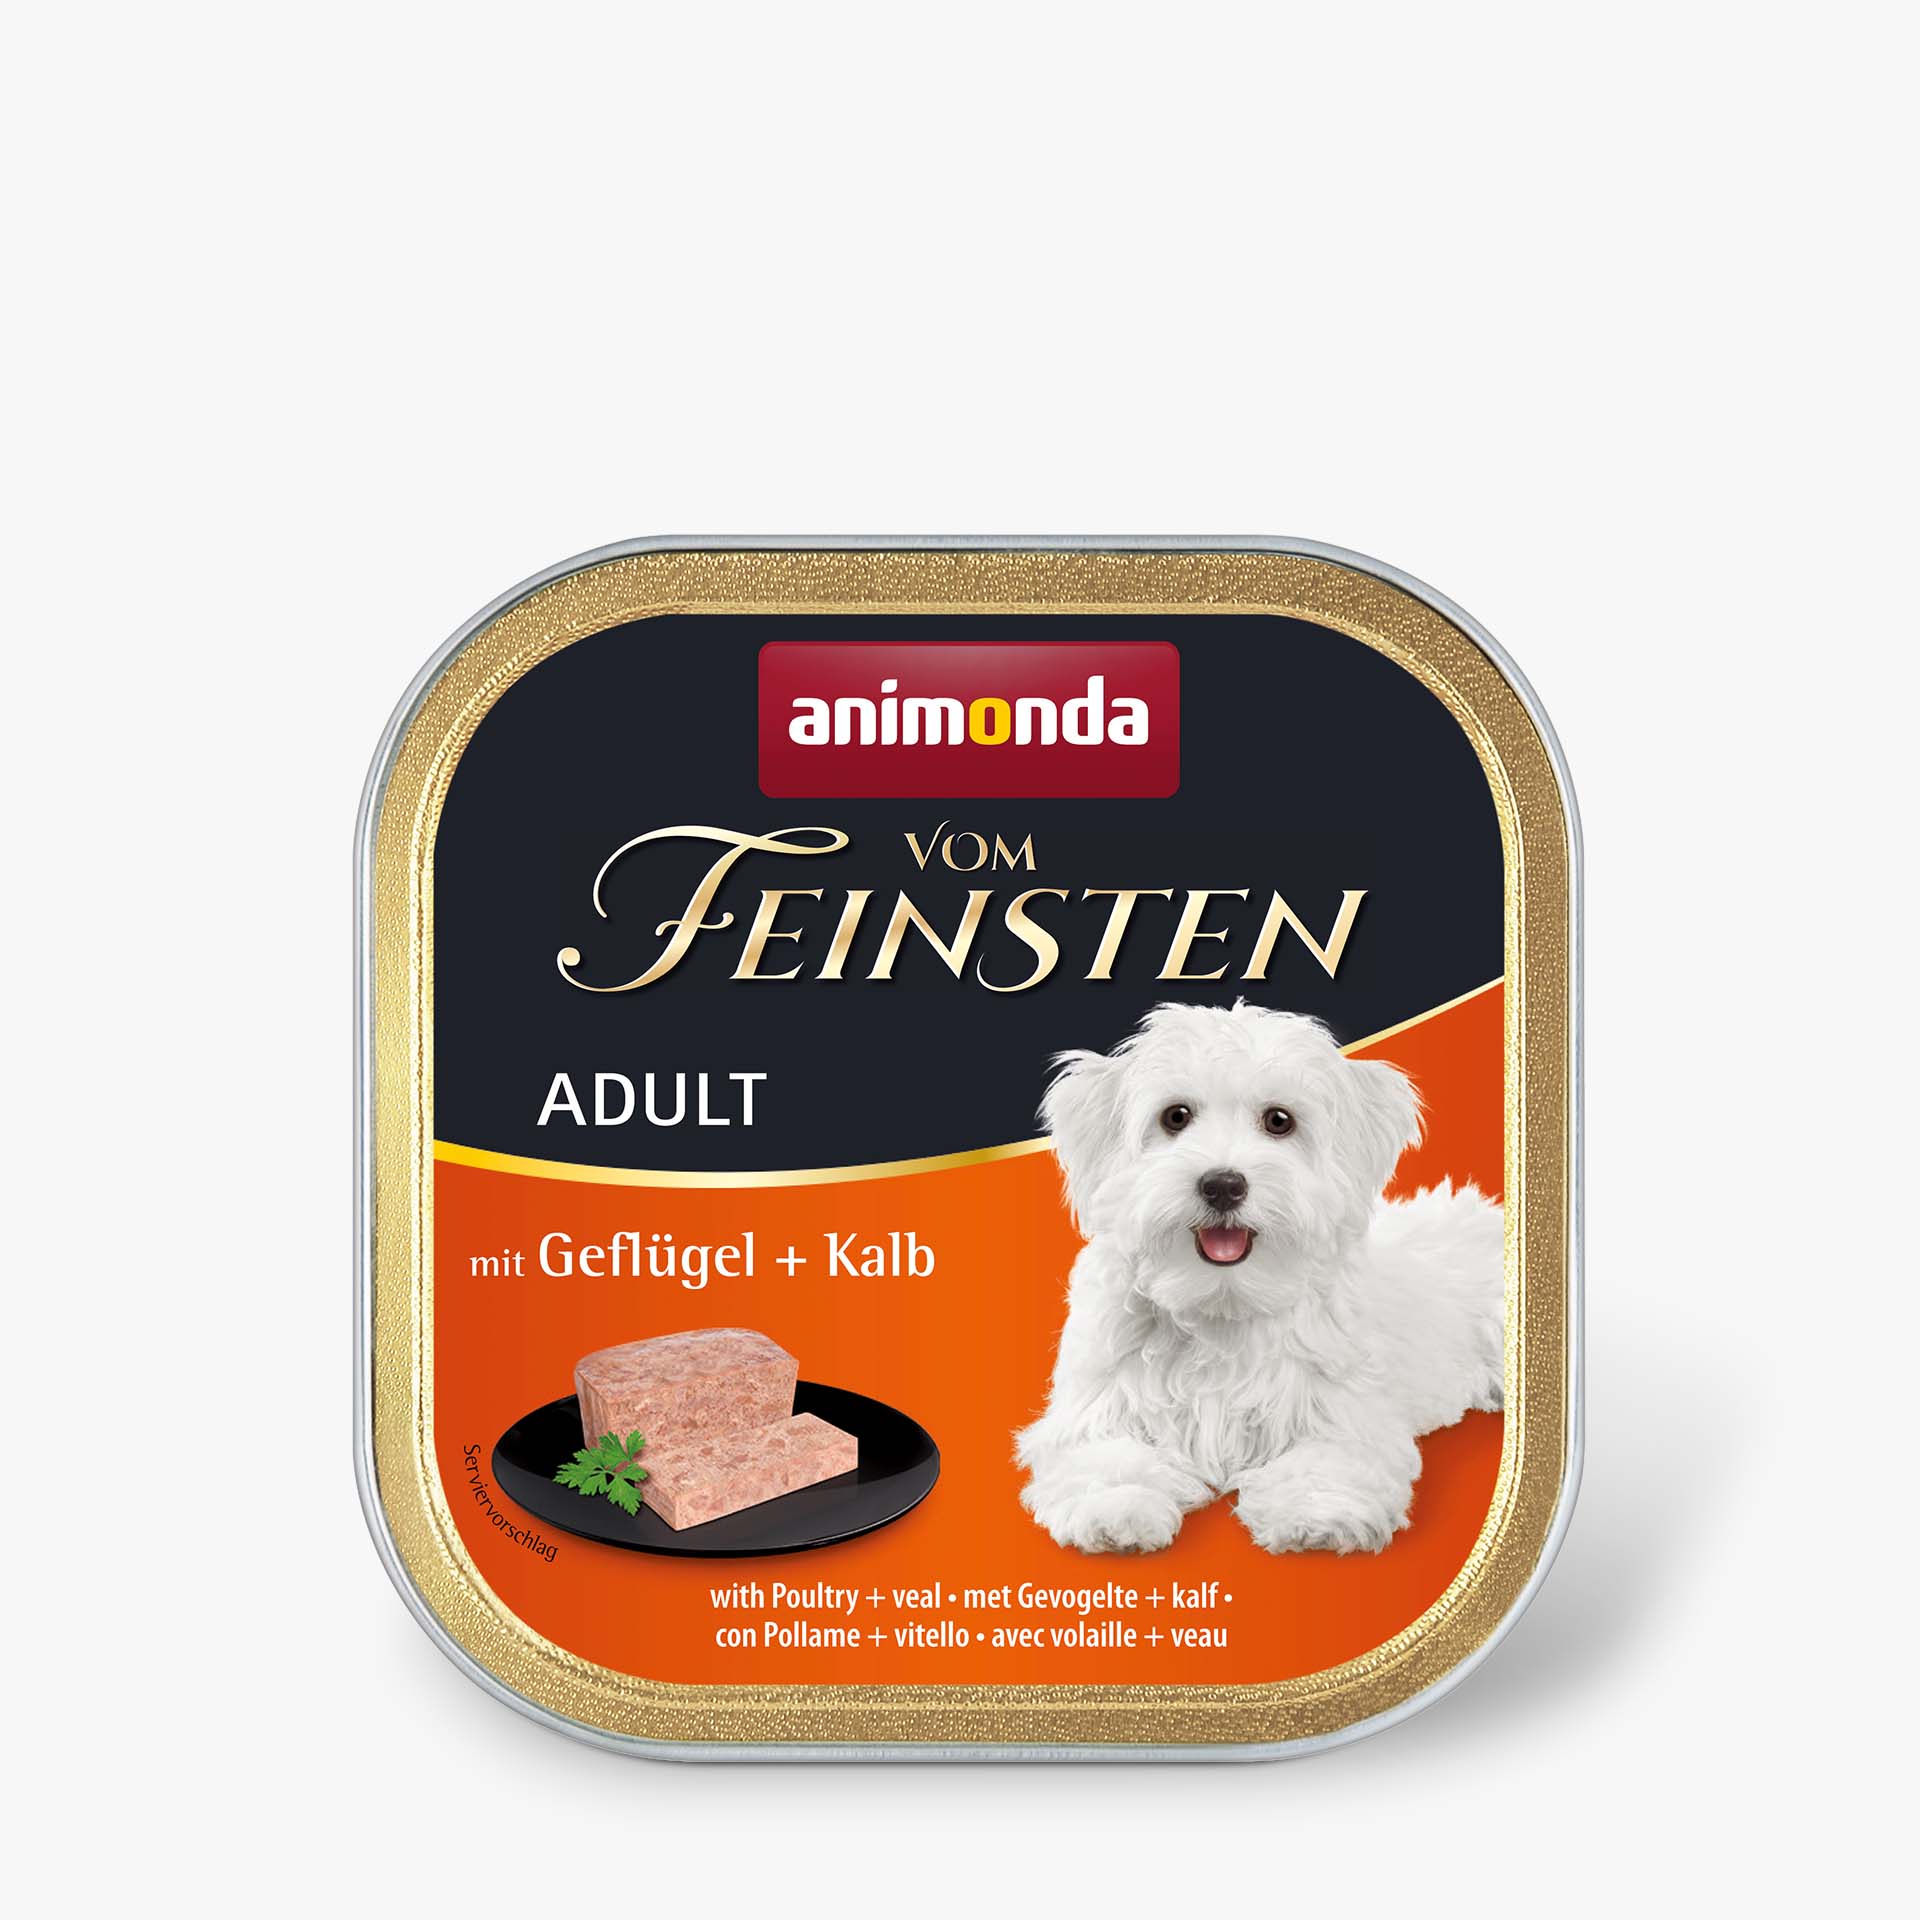 Vom Feinsten with Poultry + veal 